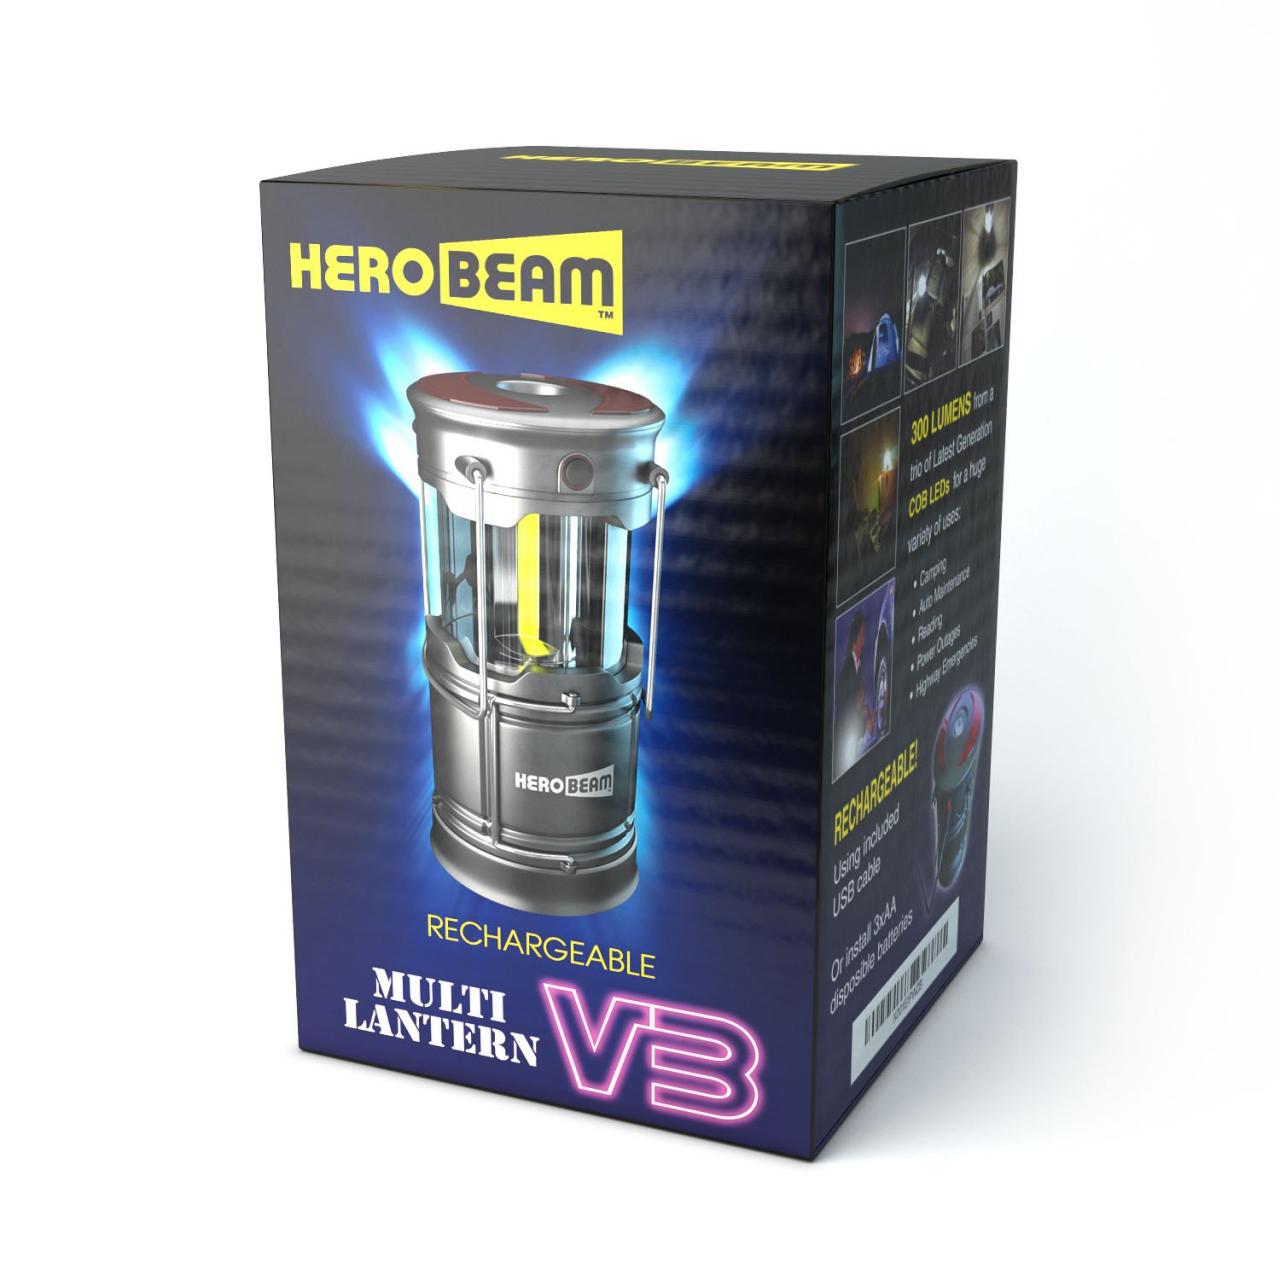 HeroBeam LED Lantern V2.0 with Flashlight - 2016 COB Technology emits 300  LUMENS! - Collapsible Tough Lamp - Great Light for Camping Car Shed Attic  Garage & Power Cuts - 5 YEAR